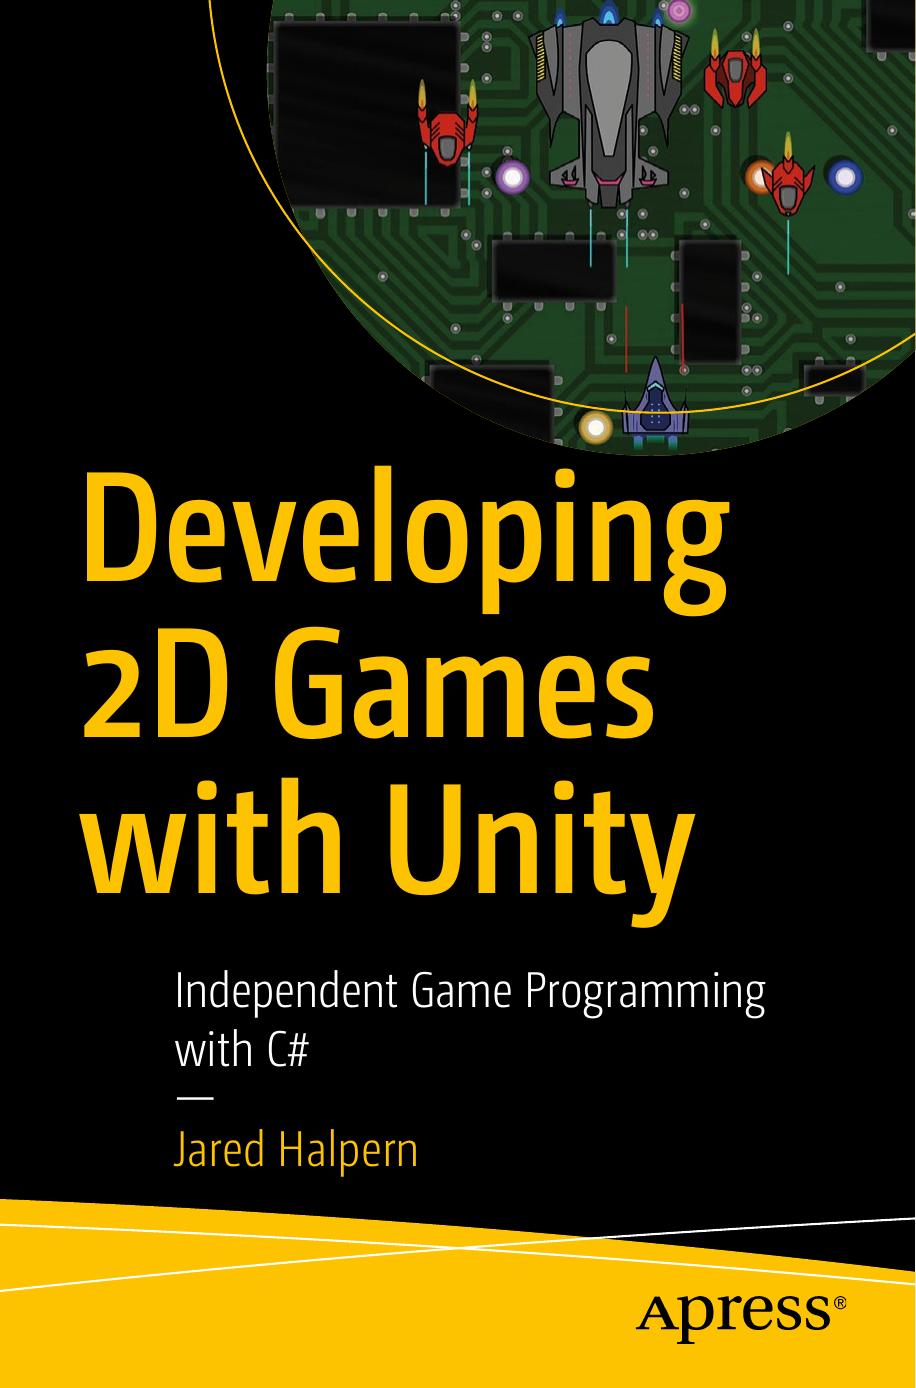 Developing 2D Games with Unity Independent Game Programming with C# 2018